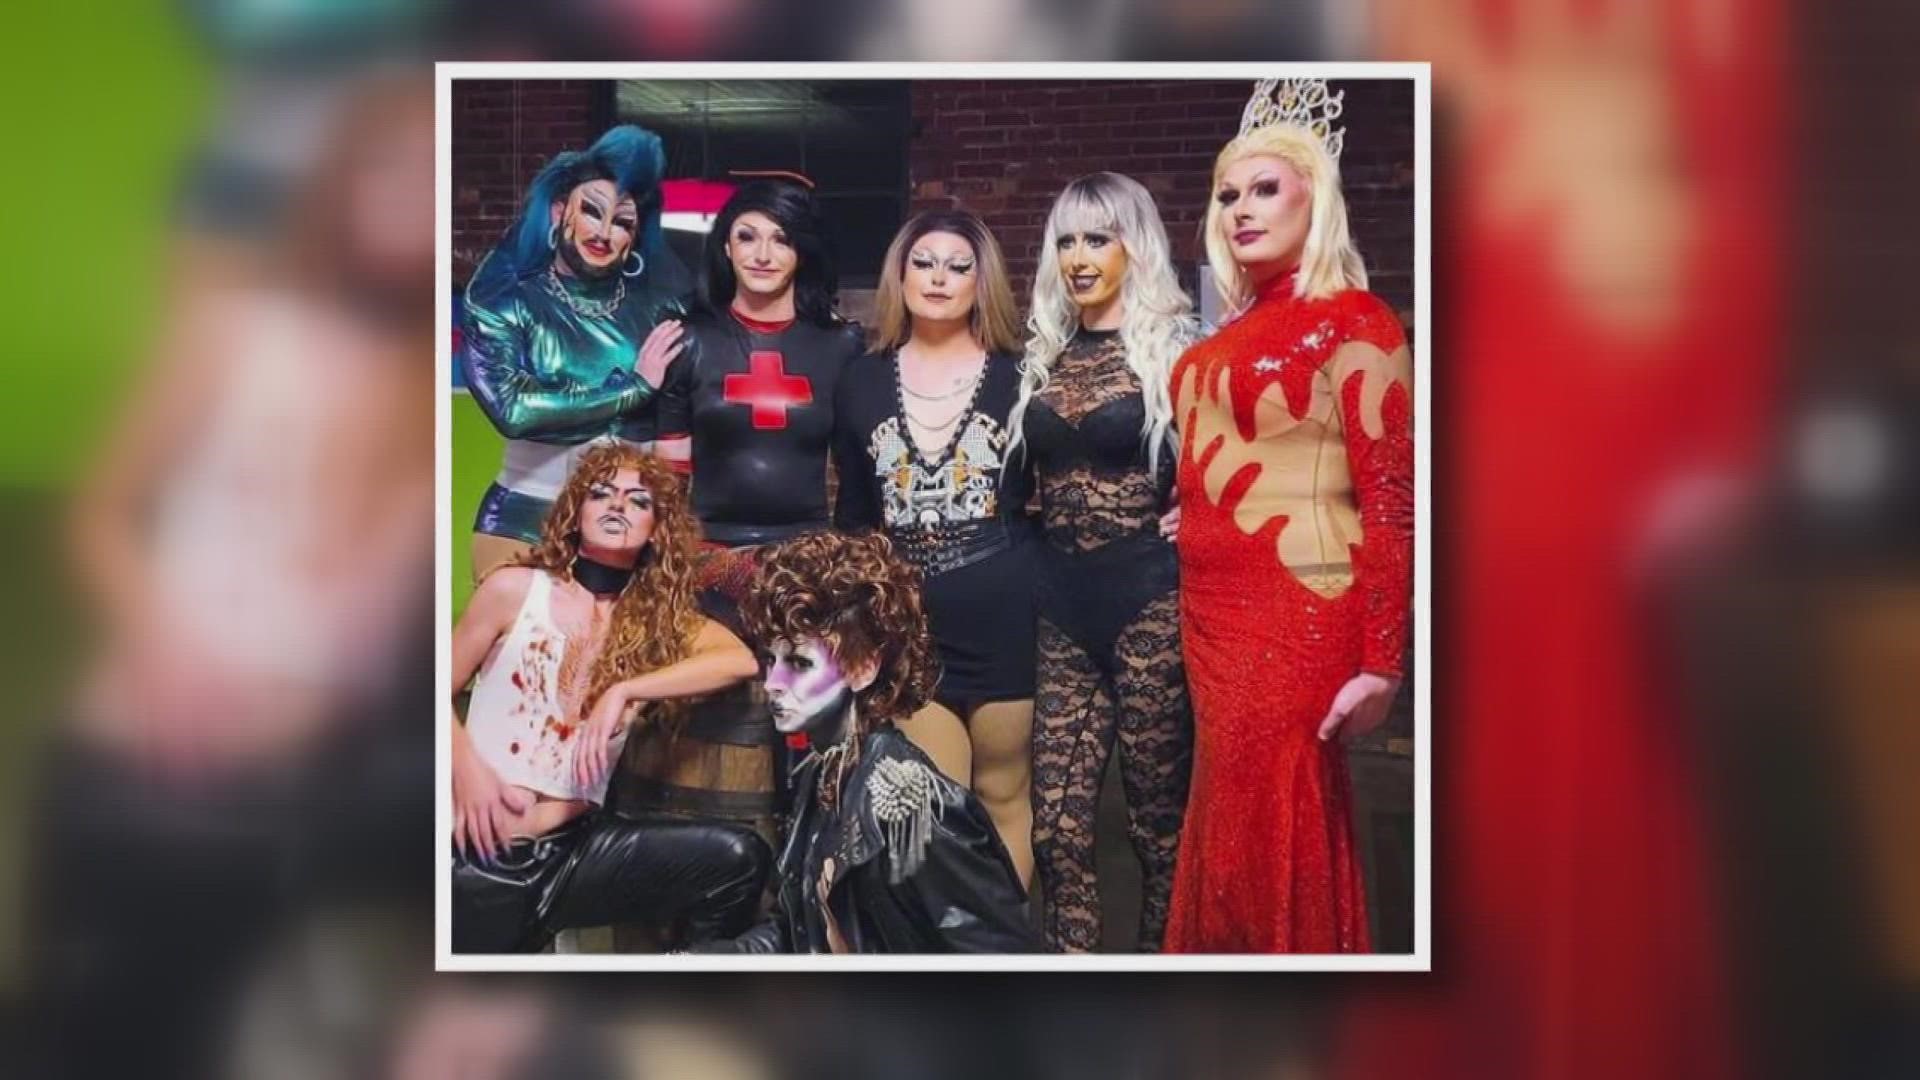 Drag shows across East Tennessee were canceled after pressure from some groups.